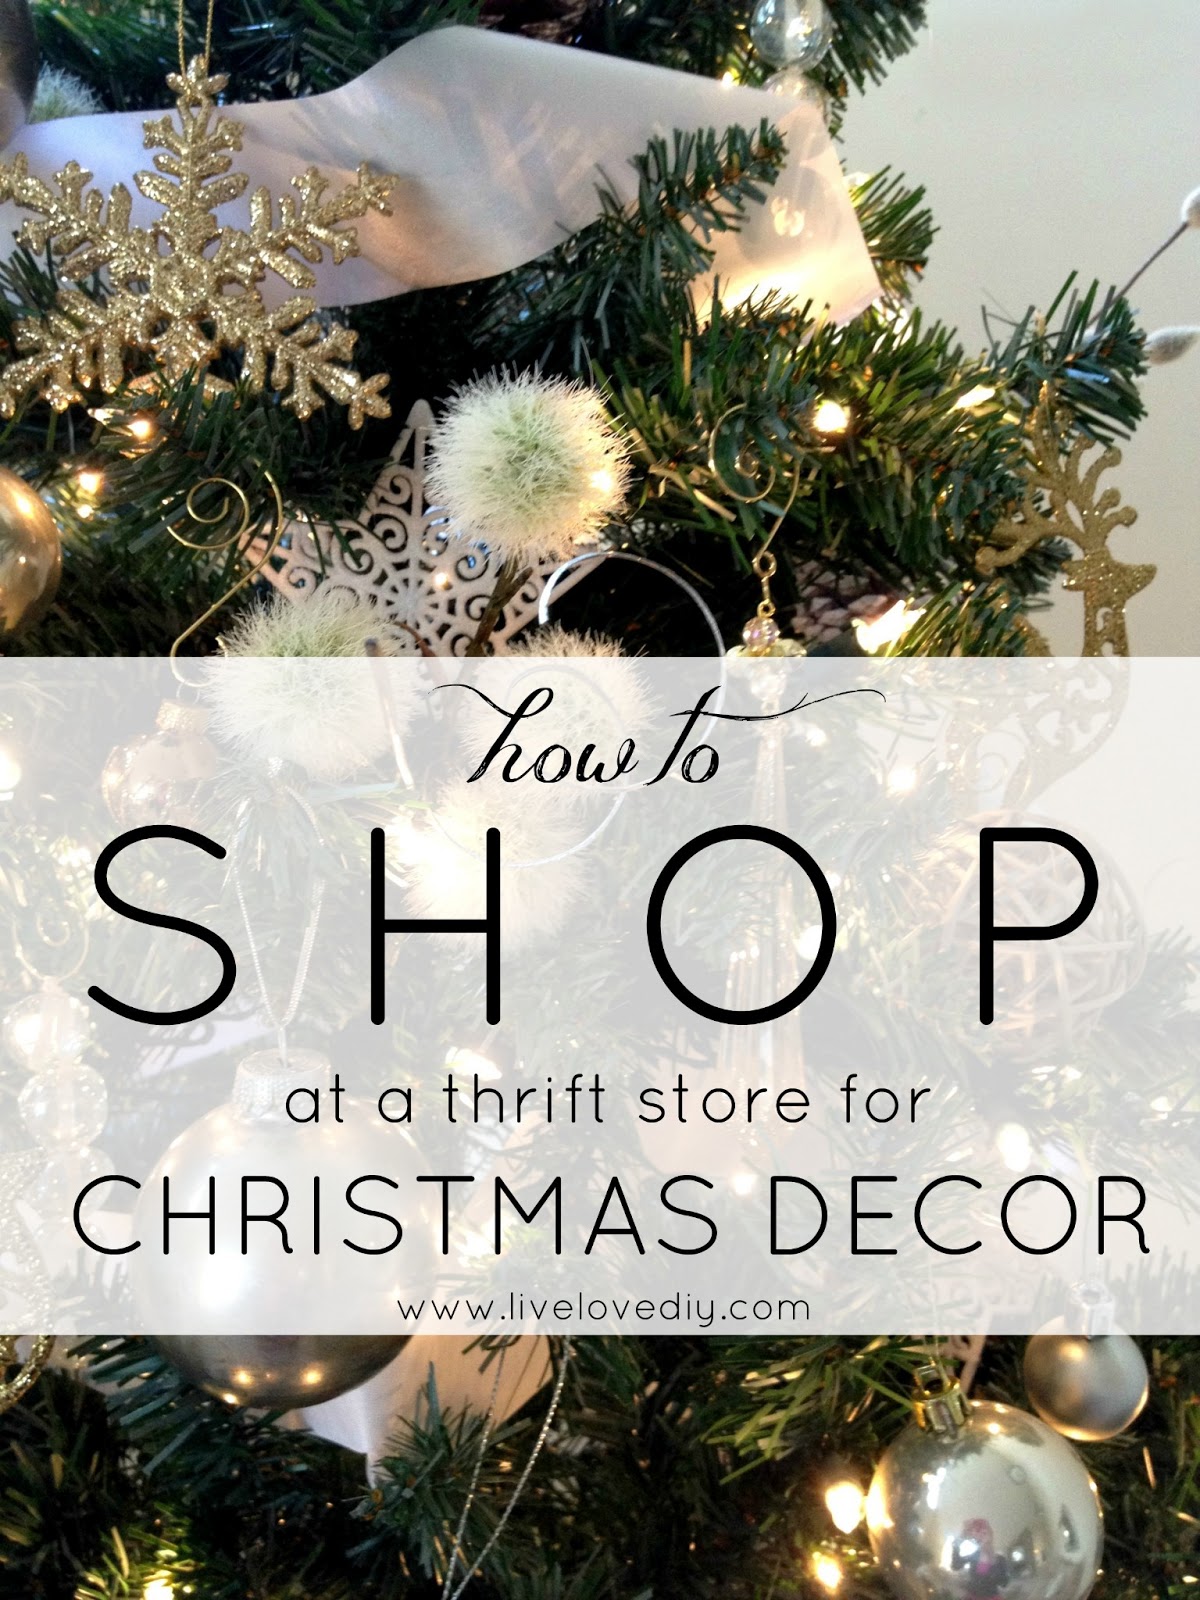 LiveLoveDIY: How To Shop at a Thrift Store for Christmas Decor